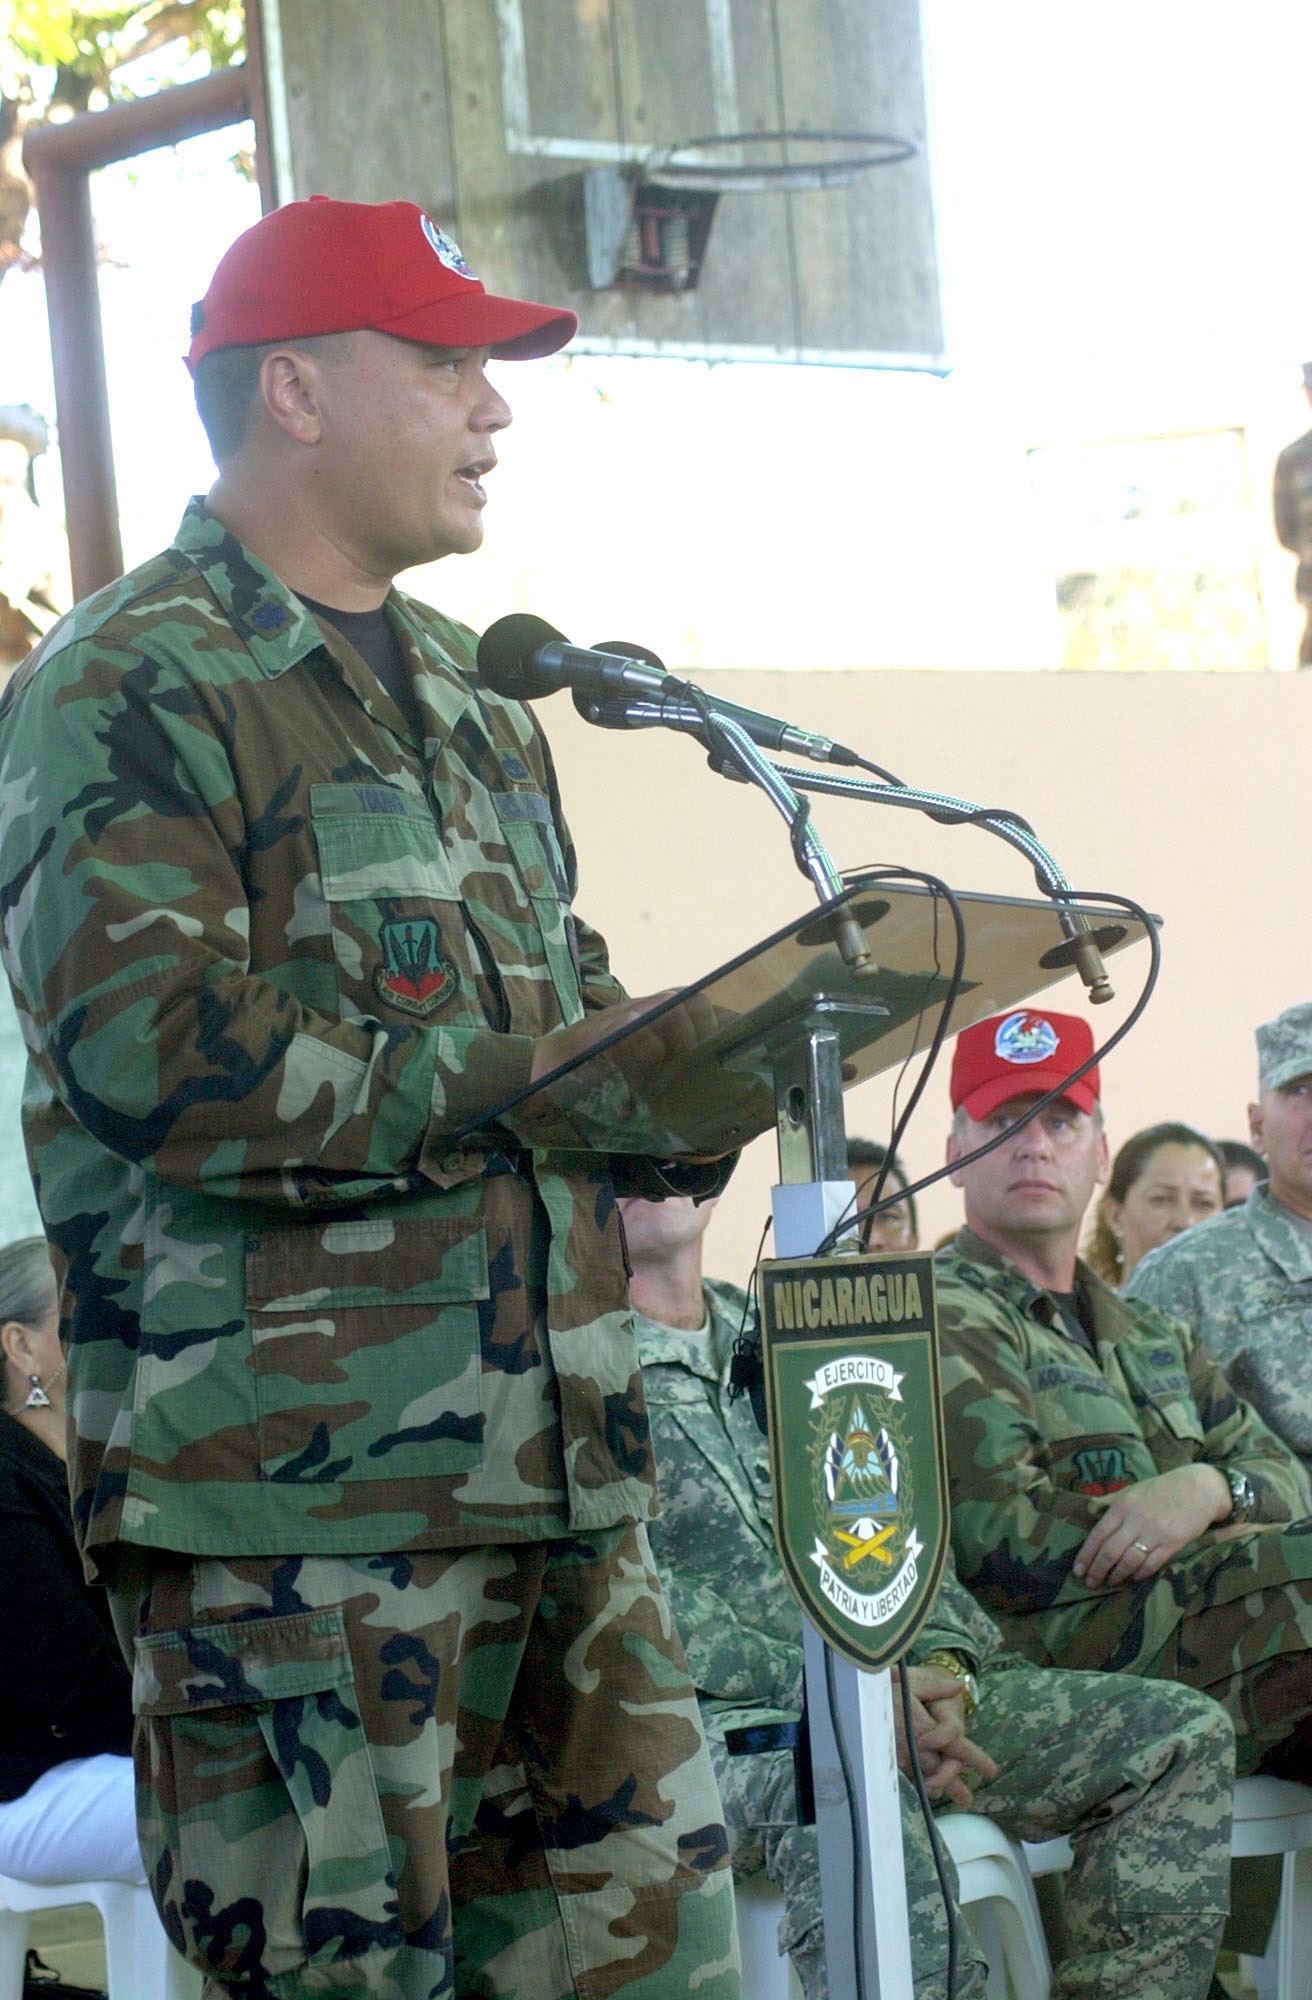 Lt. Col. Aaron Young, commander of the 820th Expeditionary Red Horse Squadron, thanks the people of Nicaragua for their hospitality during the opening ceremony for New Horizons in Santa Teresa, Nicaragua, Feb. 15. The squadron, along with members from other branches of service, will build a new school and medical clinic for the people here. (U.S. Air Force photo/Tech. Sgt. Sonny Cohrs) 